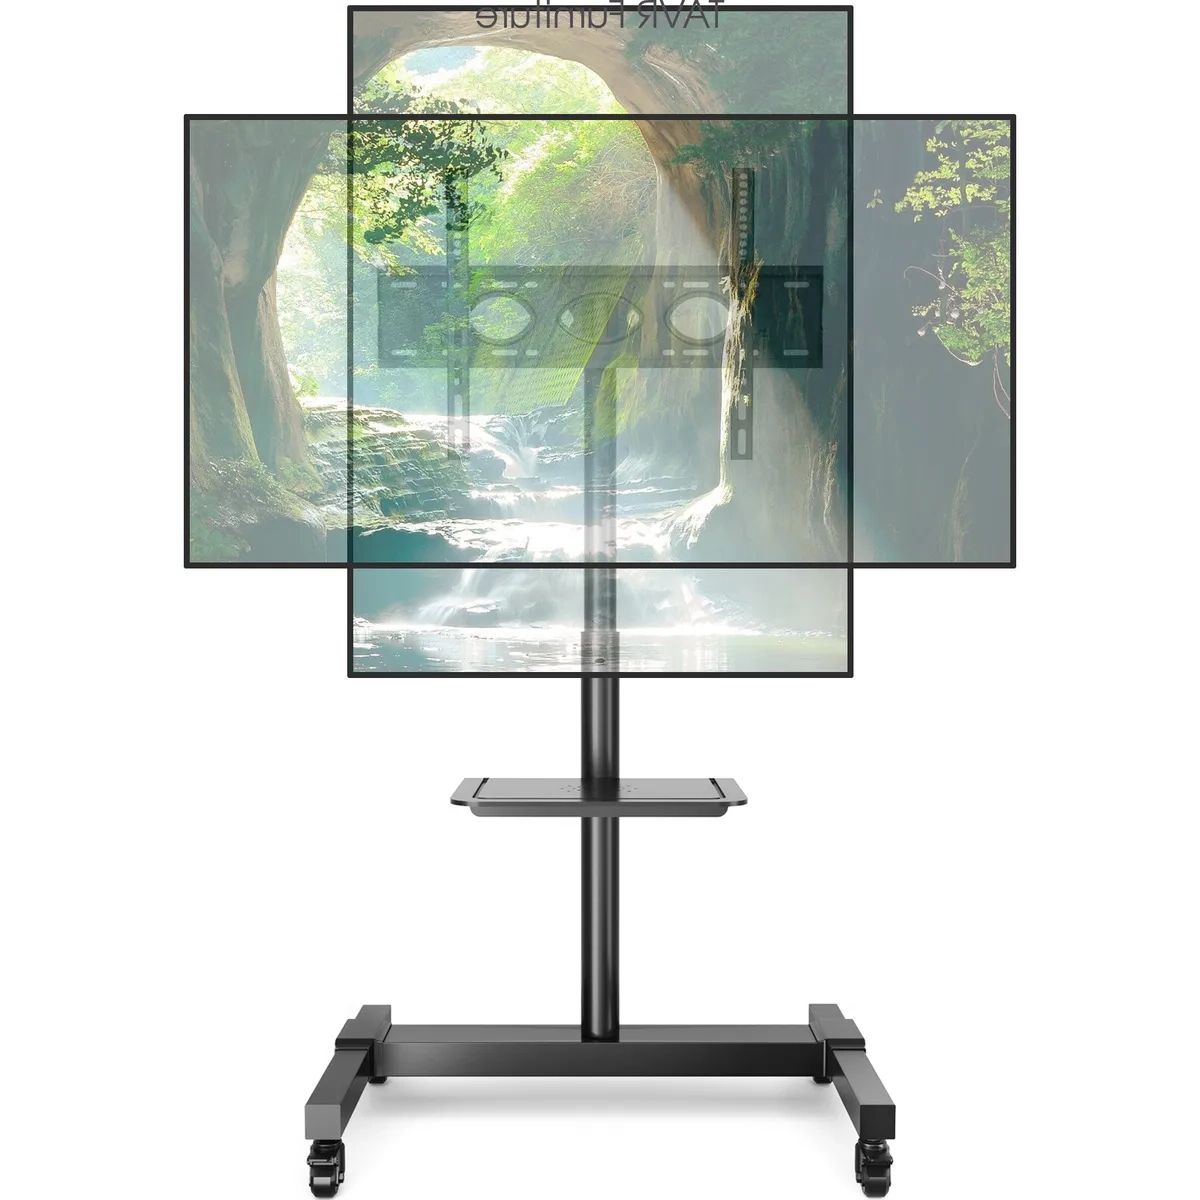 Universal Mobile Tv Stand Tilt Rolling Tv Cart With Wheels For Tvs Up To 70  Inch | Ebay For Mobile Tilt Rolling Tv Stands (View 2 of 20)